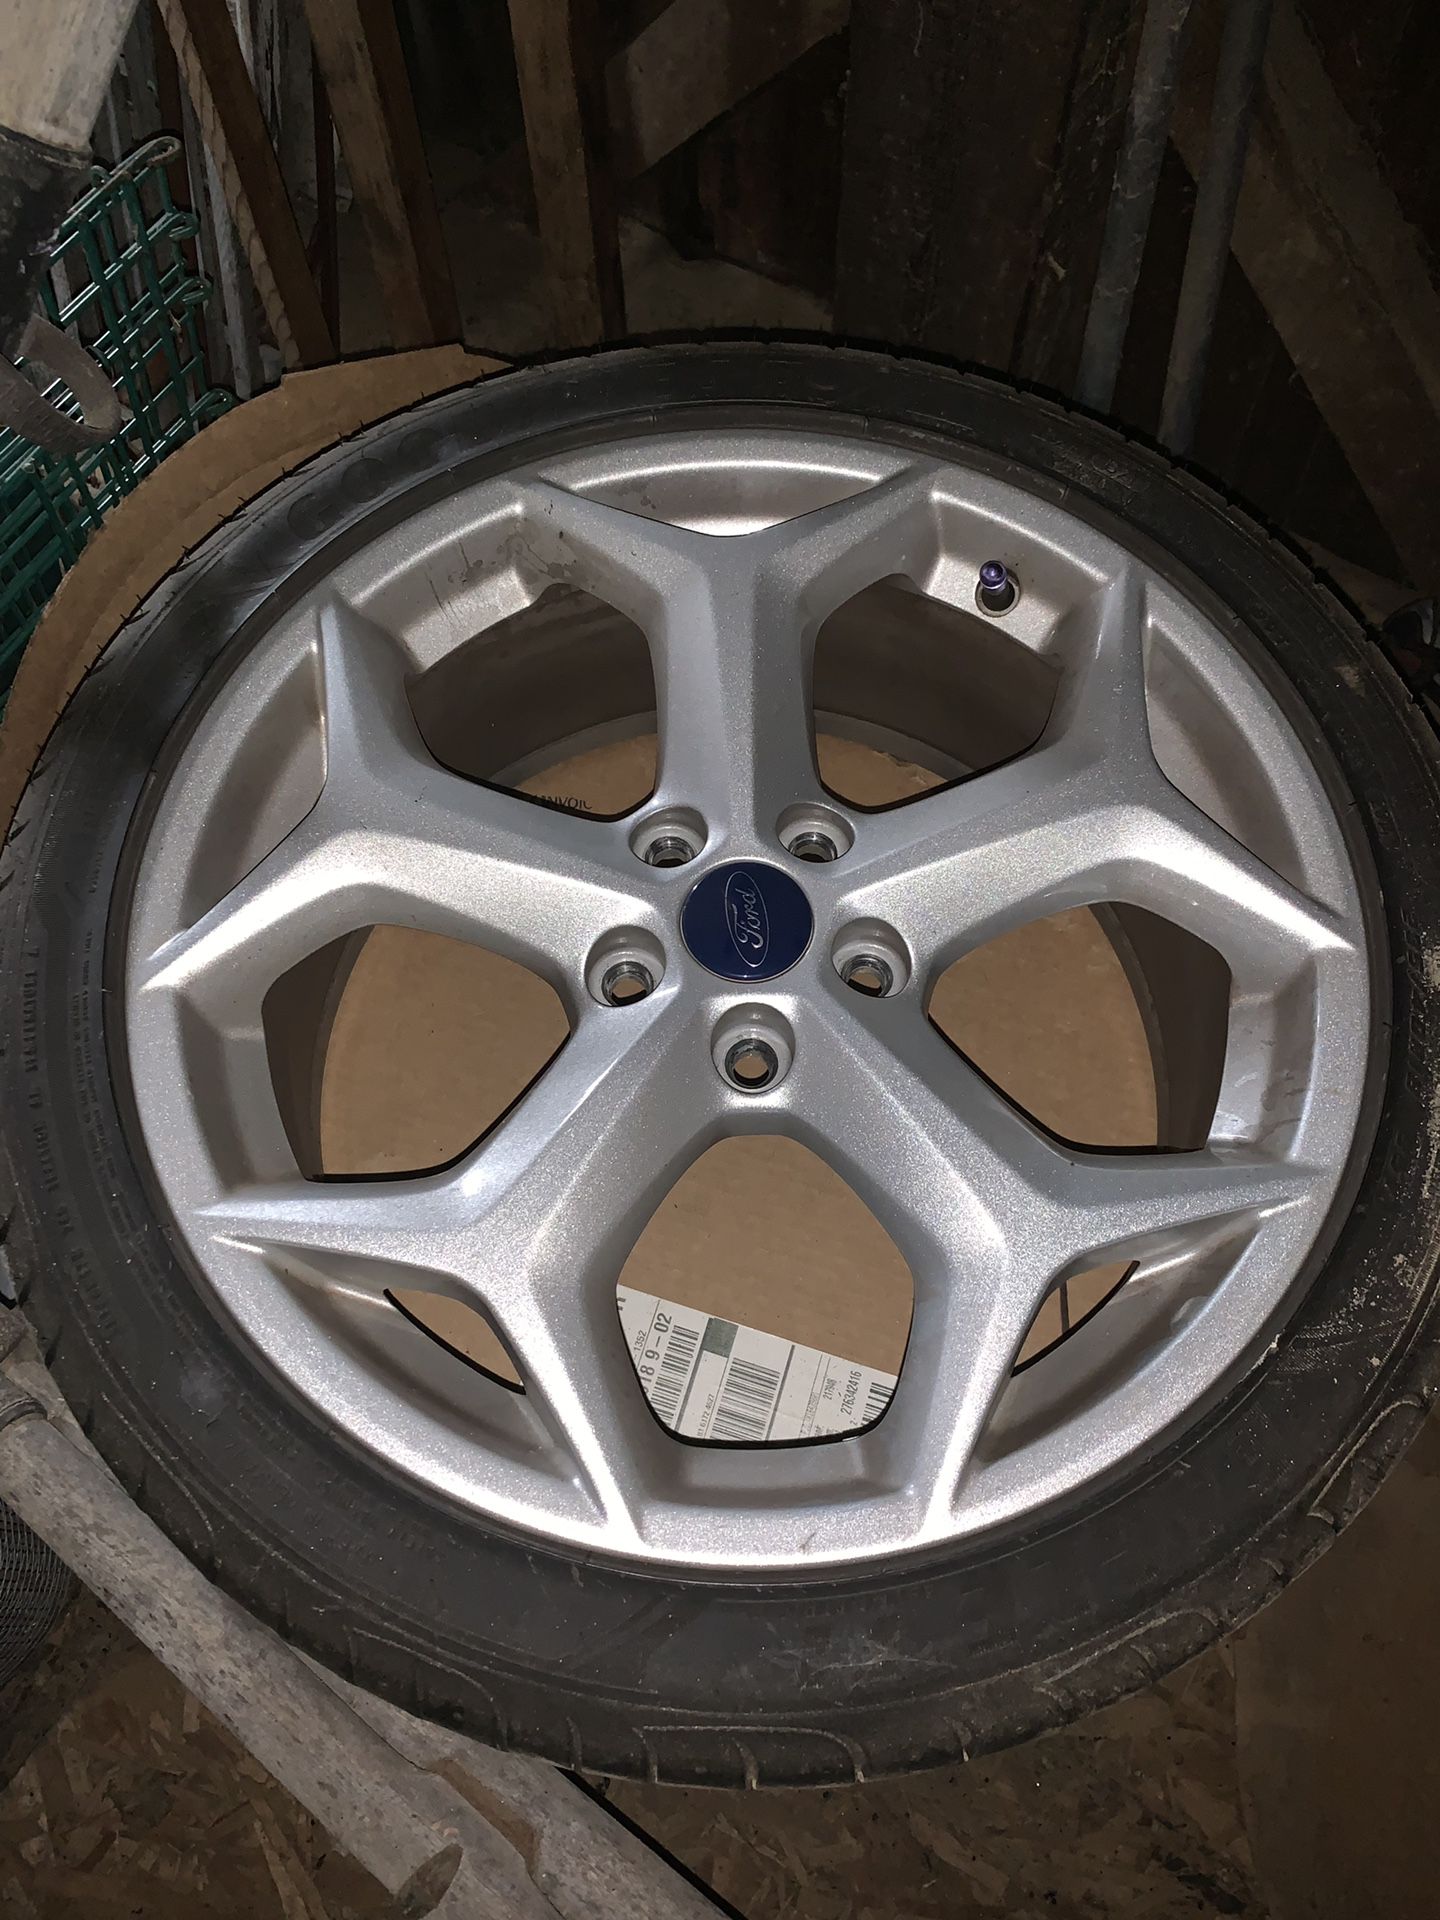 Focus ST stock rims and tires Goodyear eagle f1 with under 10000 miles